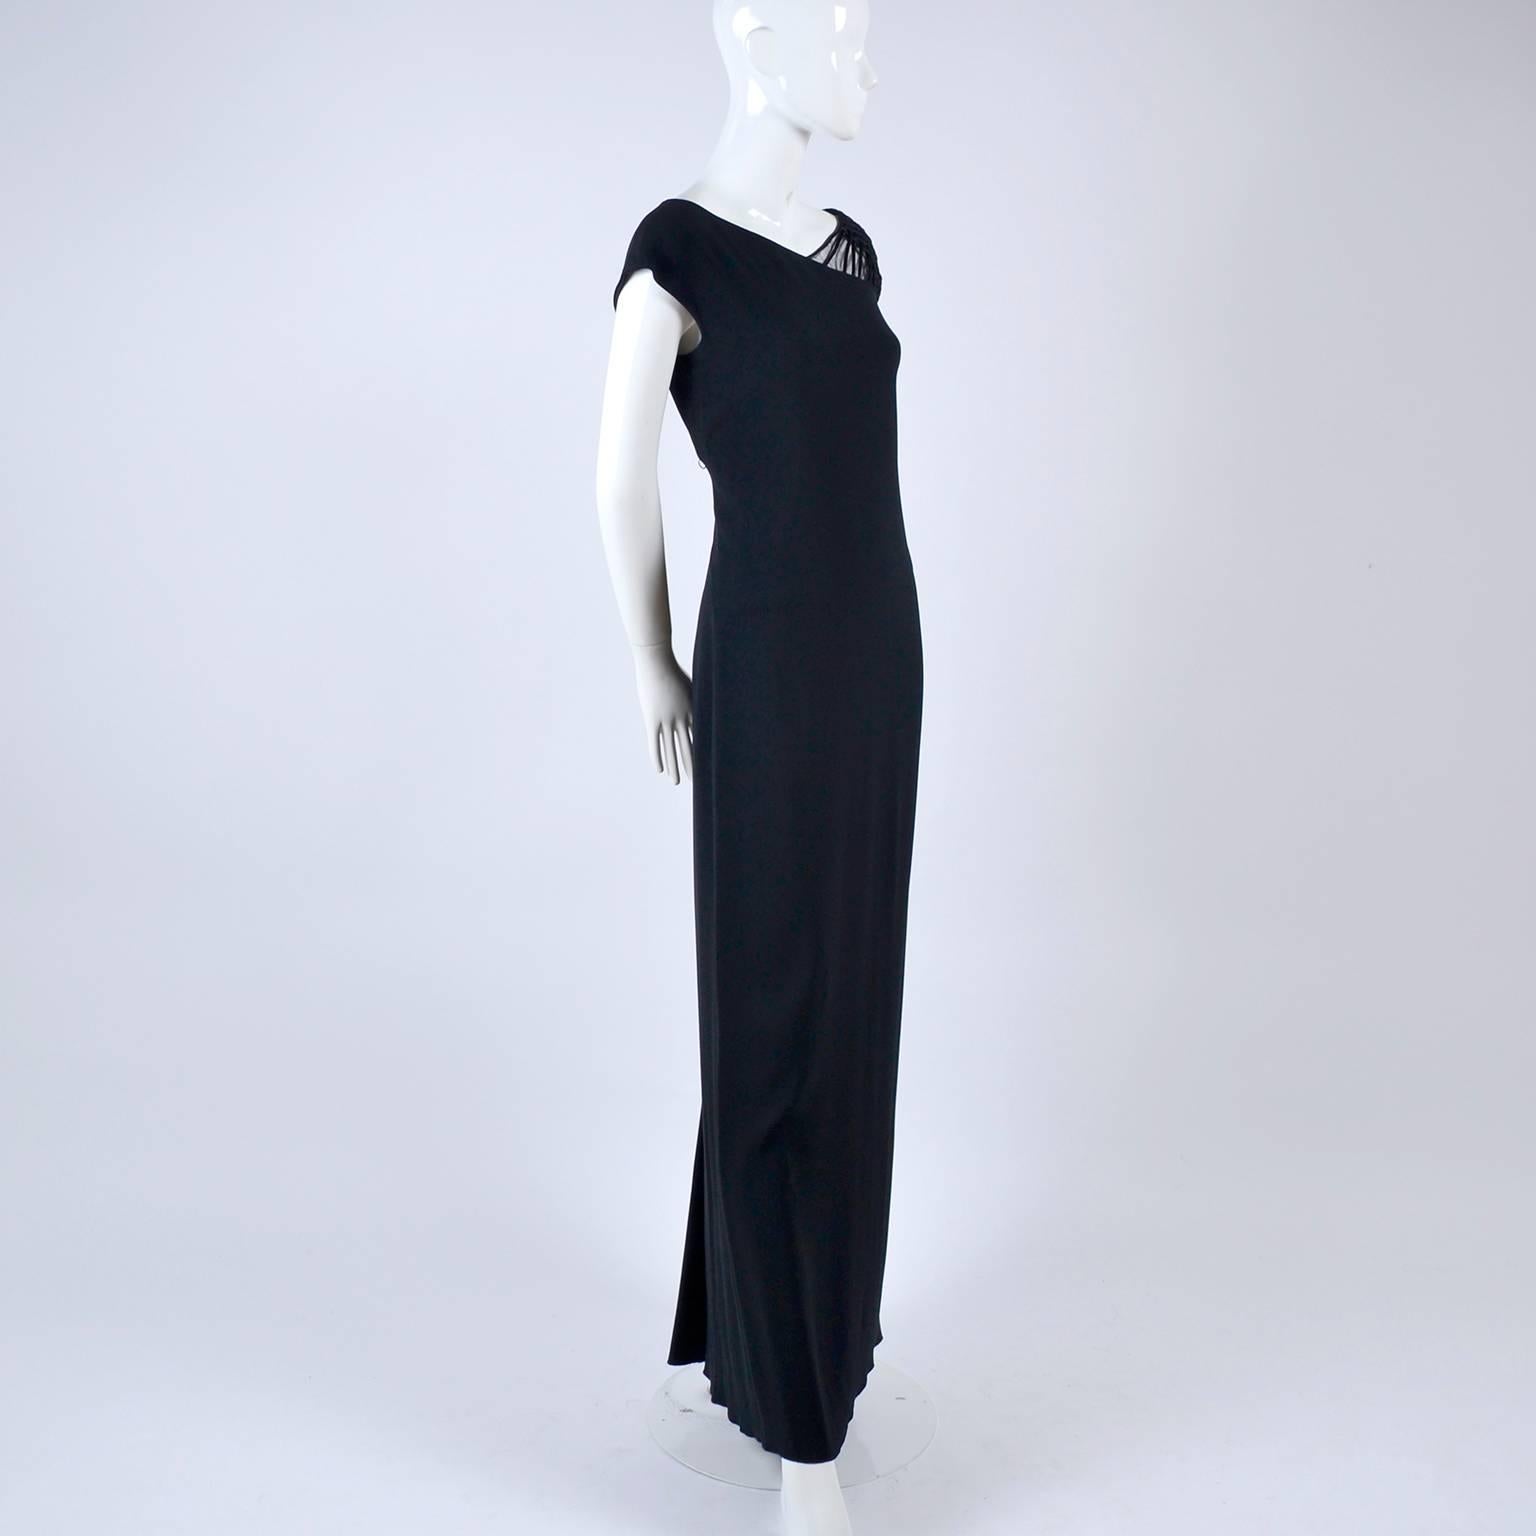 1990s Valentino Dress Black Crepe Evening Gown With Woven Shoulder Details 5